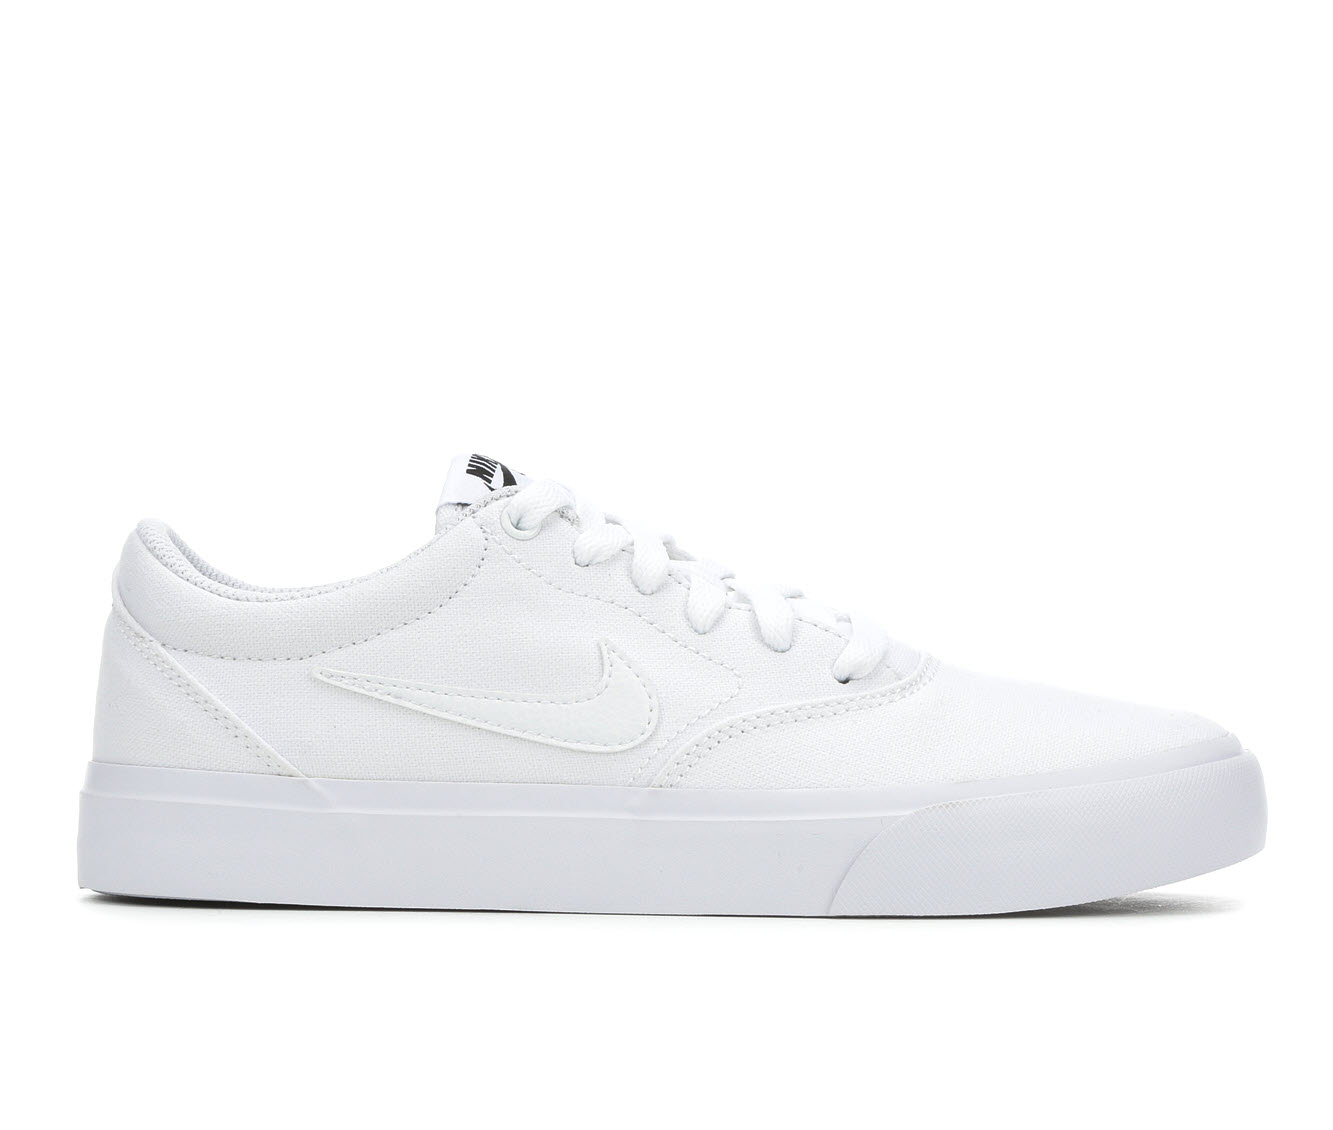 Women's Nike SB Charge Canvas Sneakers